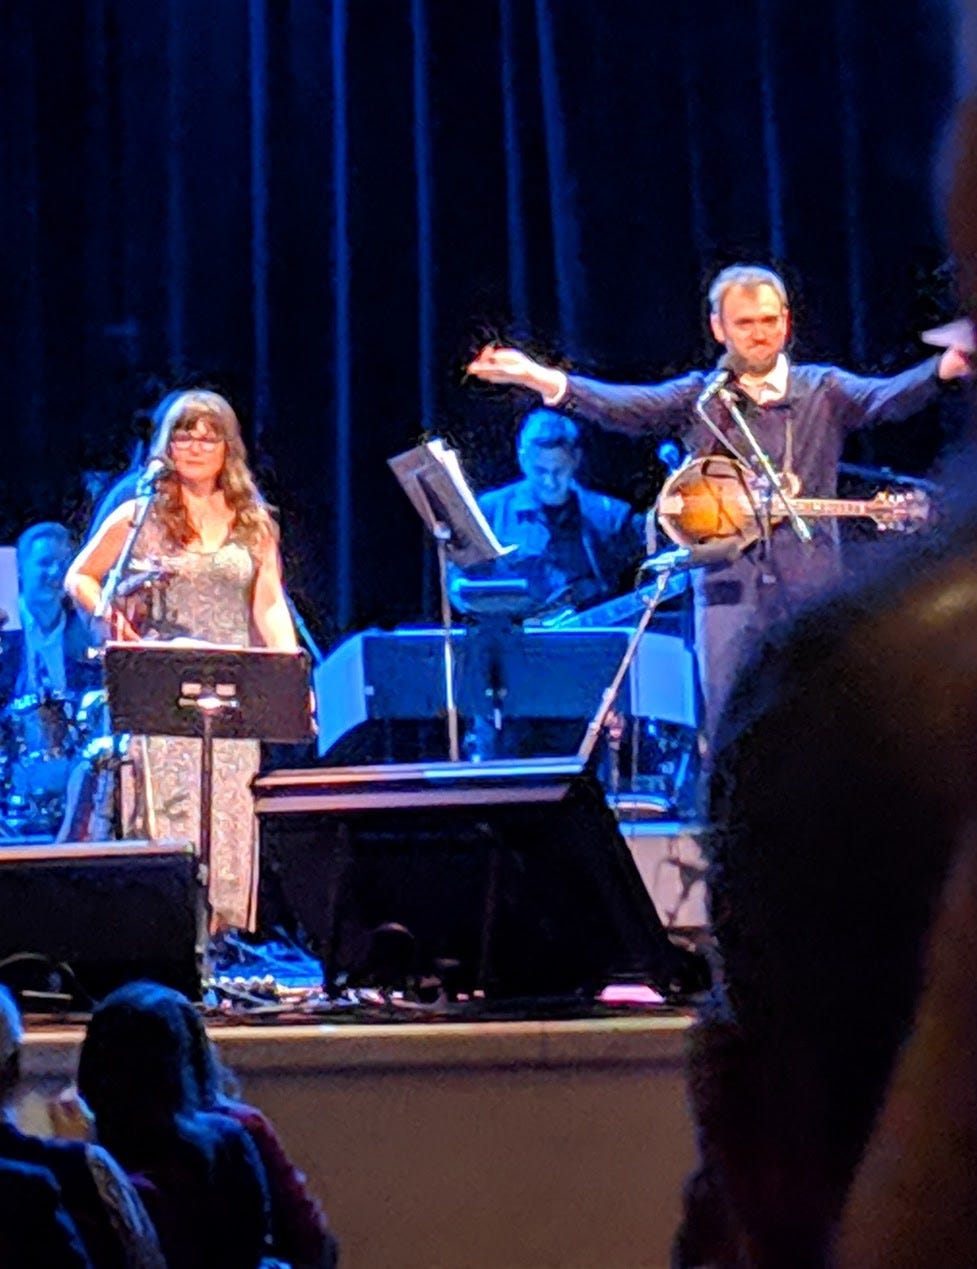 Sarah Watkins holding a violin next to Chris Thile gesturing with both arms wearing a mandolin